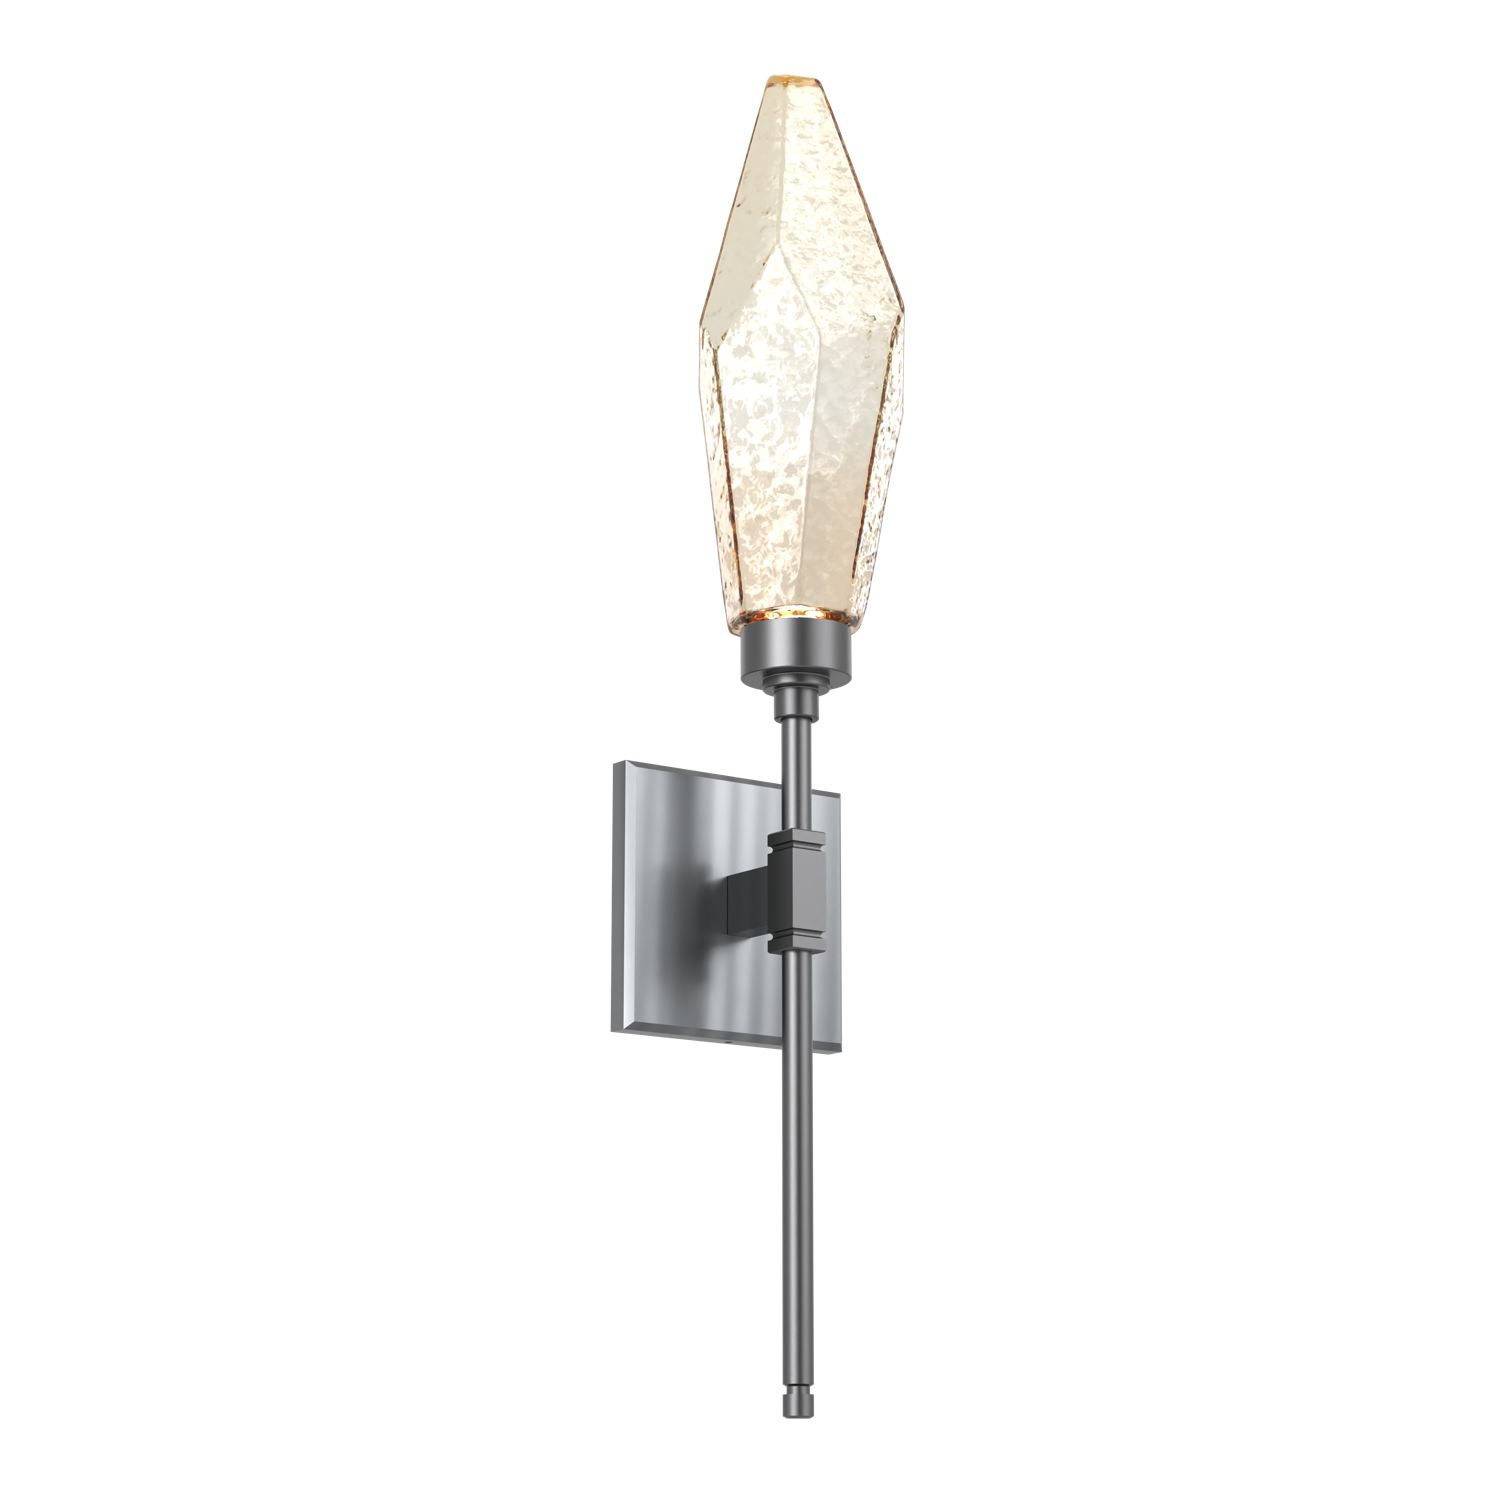 IDB0050-04-GM-CA-Hammerton-Studio-Rock-Crystal-ada-certified-belvedere-wall-sconce-with-gunmetal-finish-and-chilled-amber-blown-glass-shades-and-LED-lamping